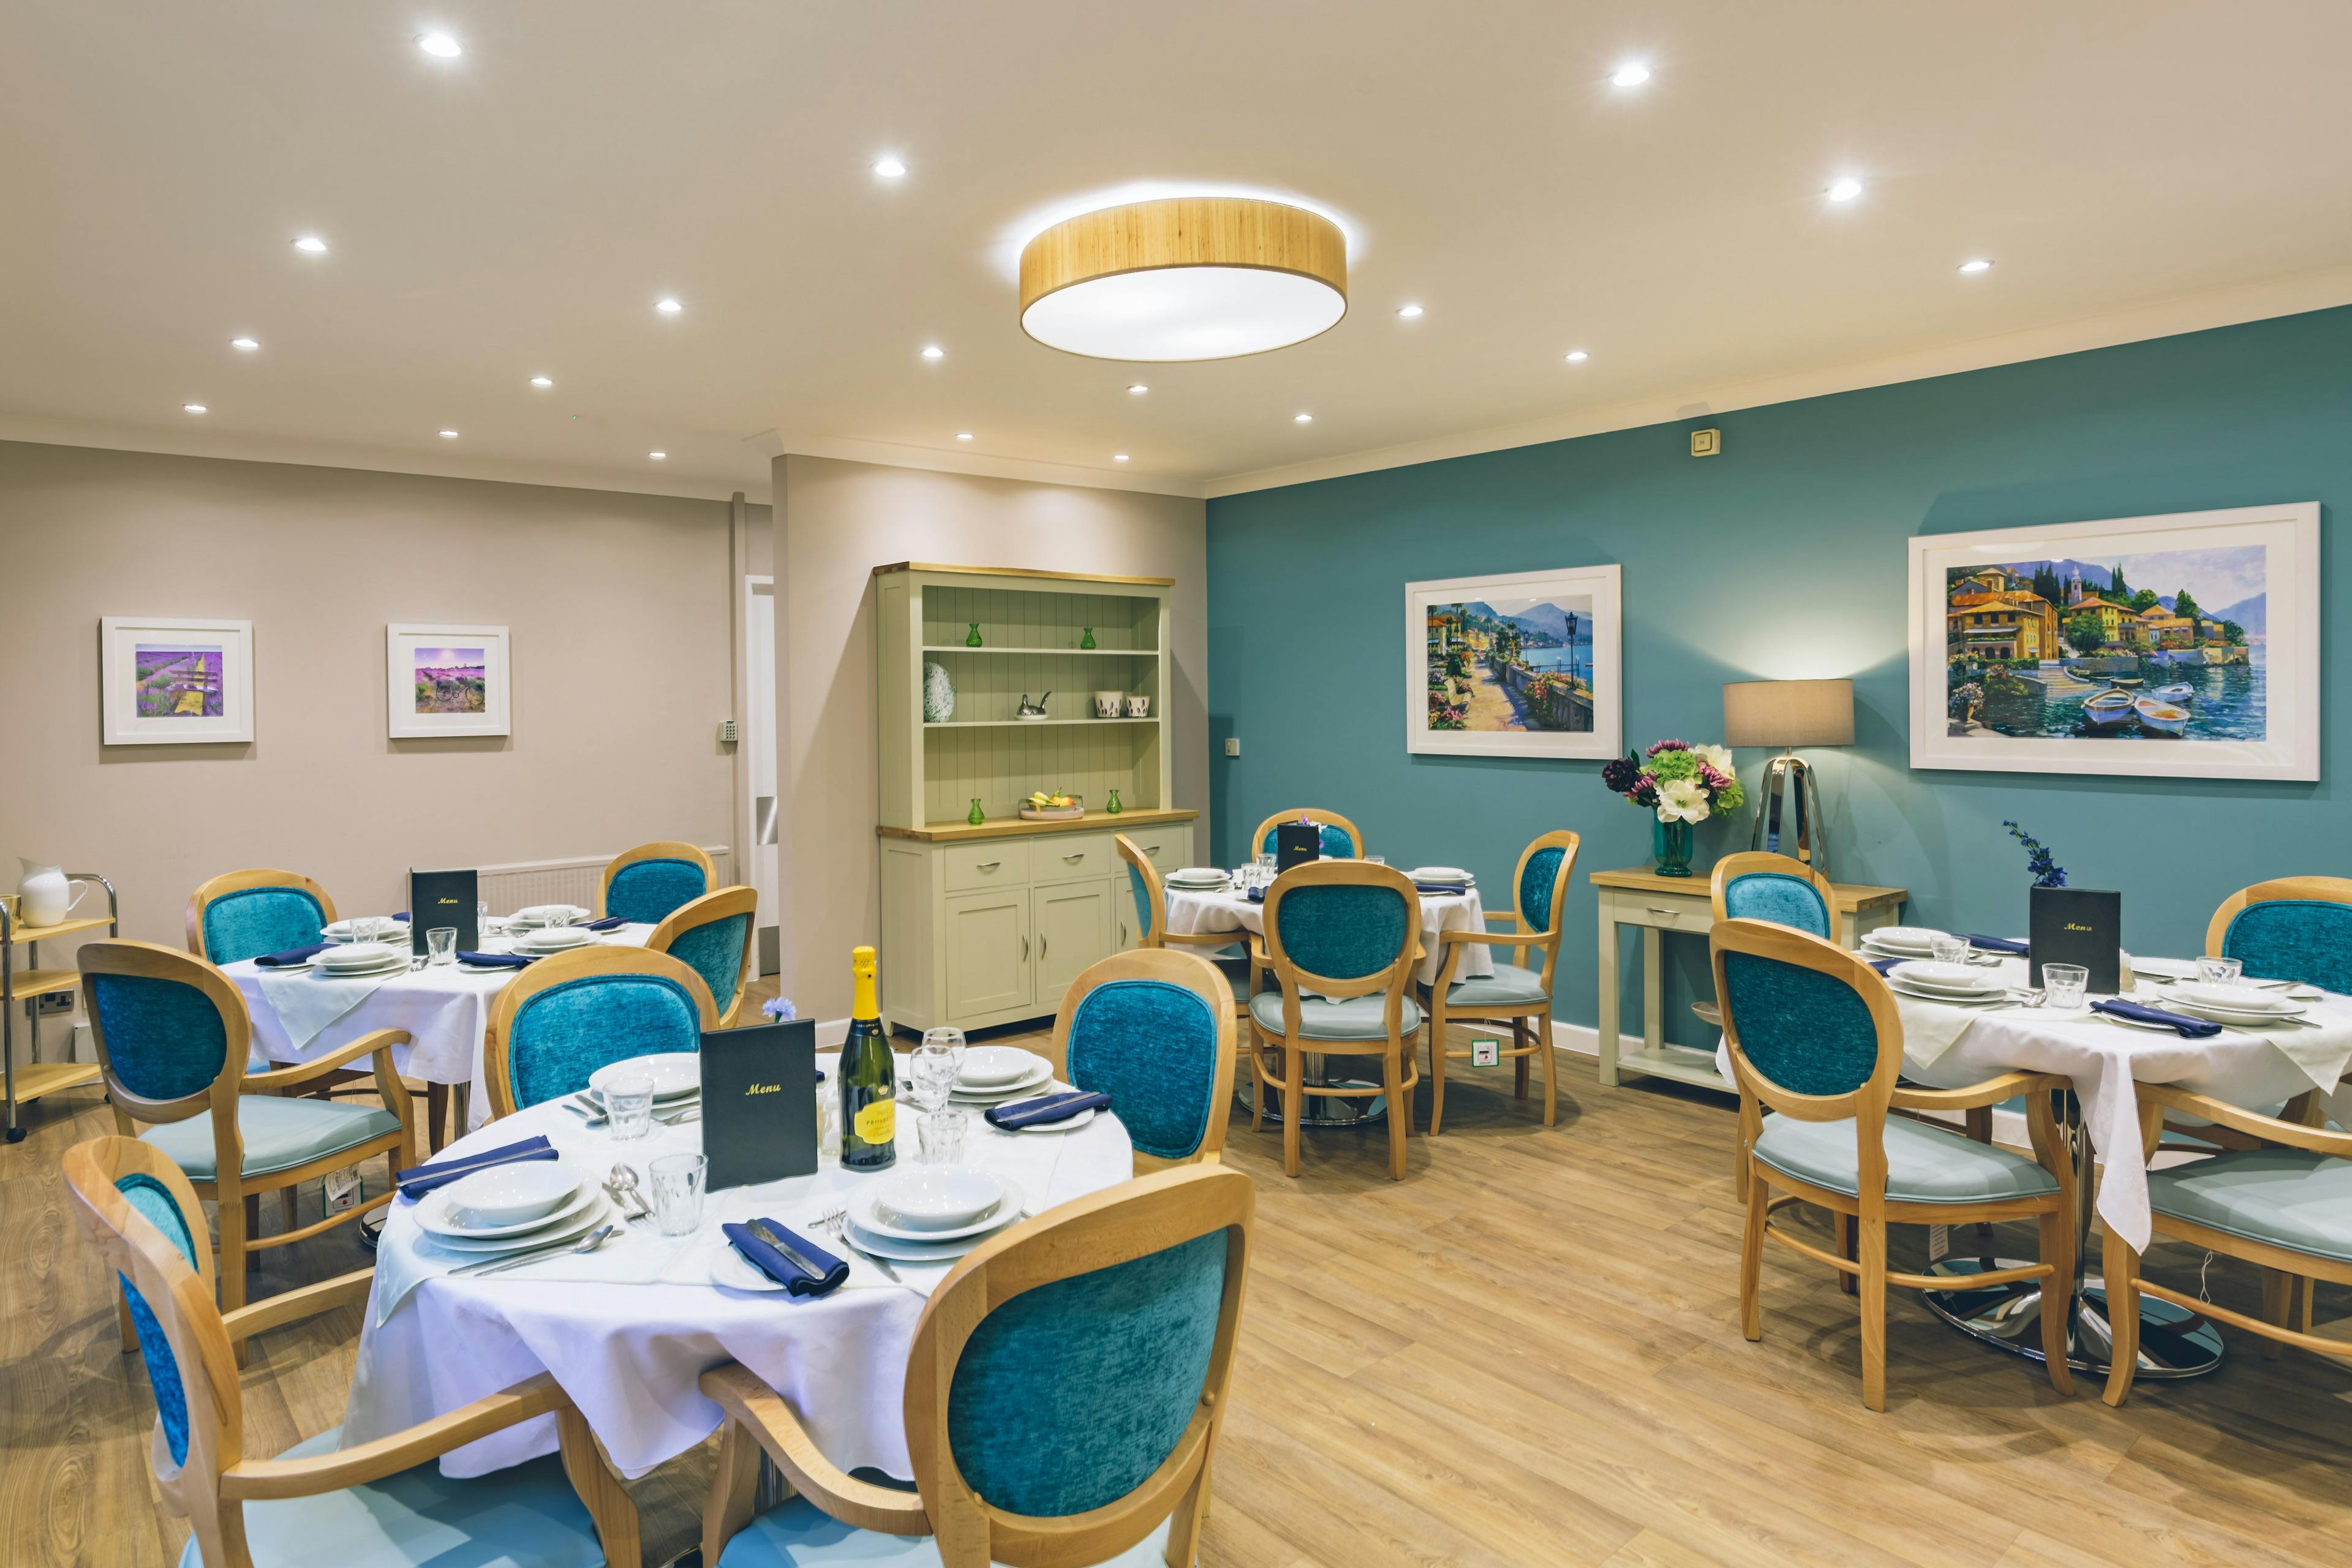 Dining Room of Vecta House Care Home in Newport, Isle of Wight